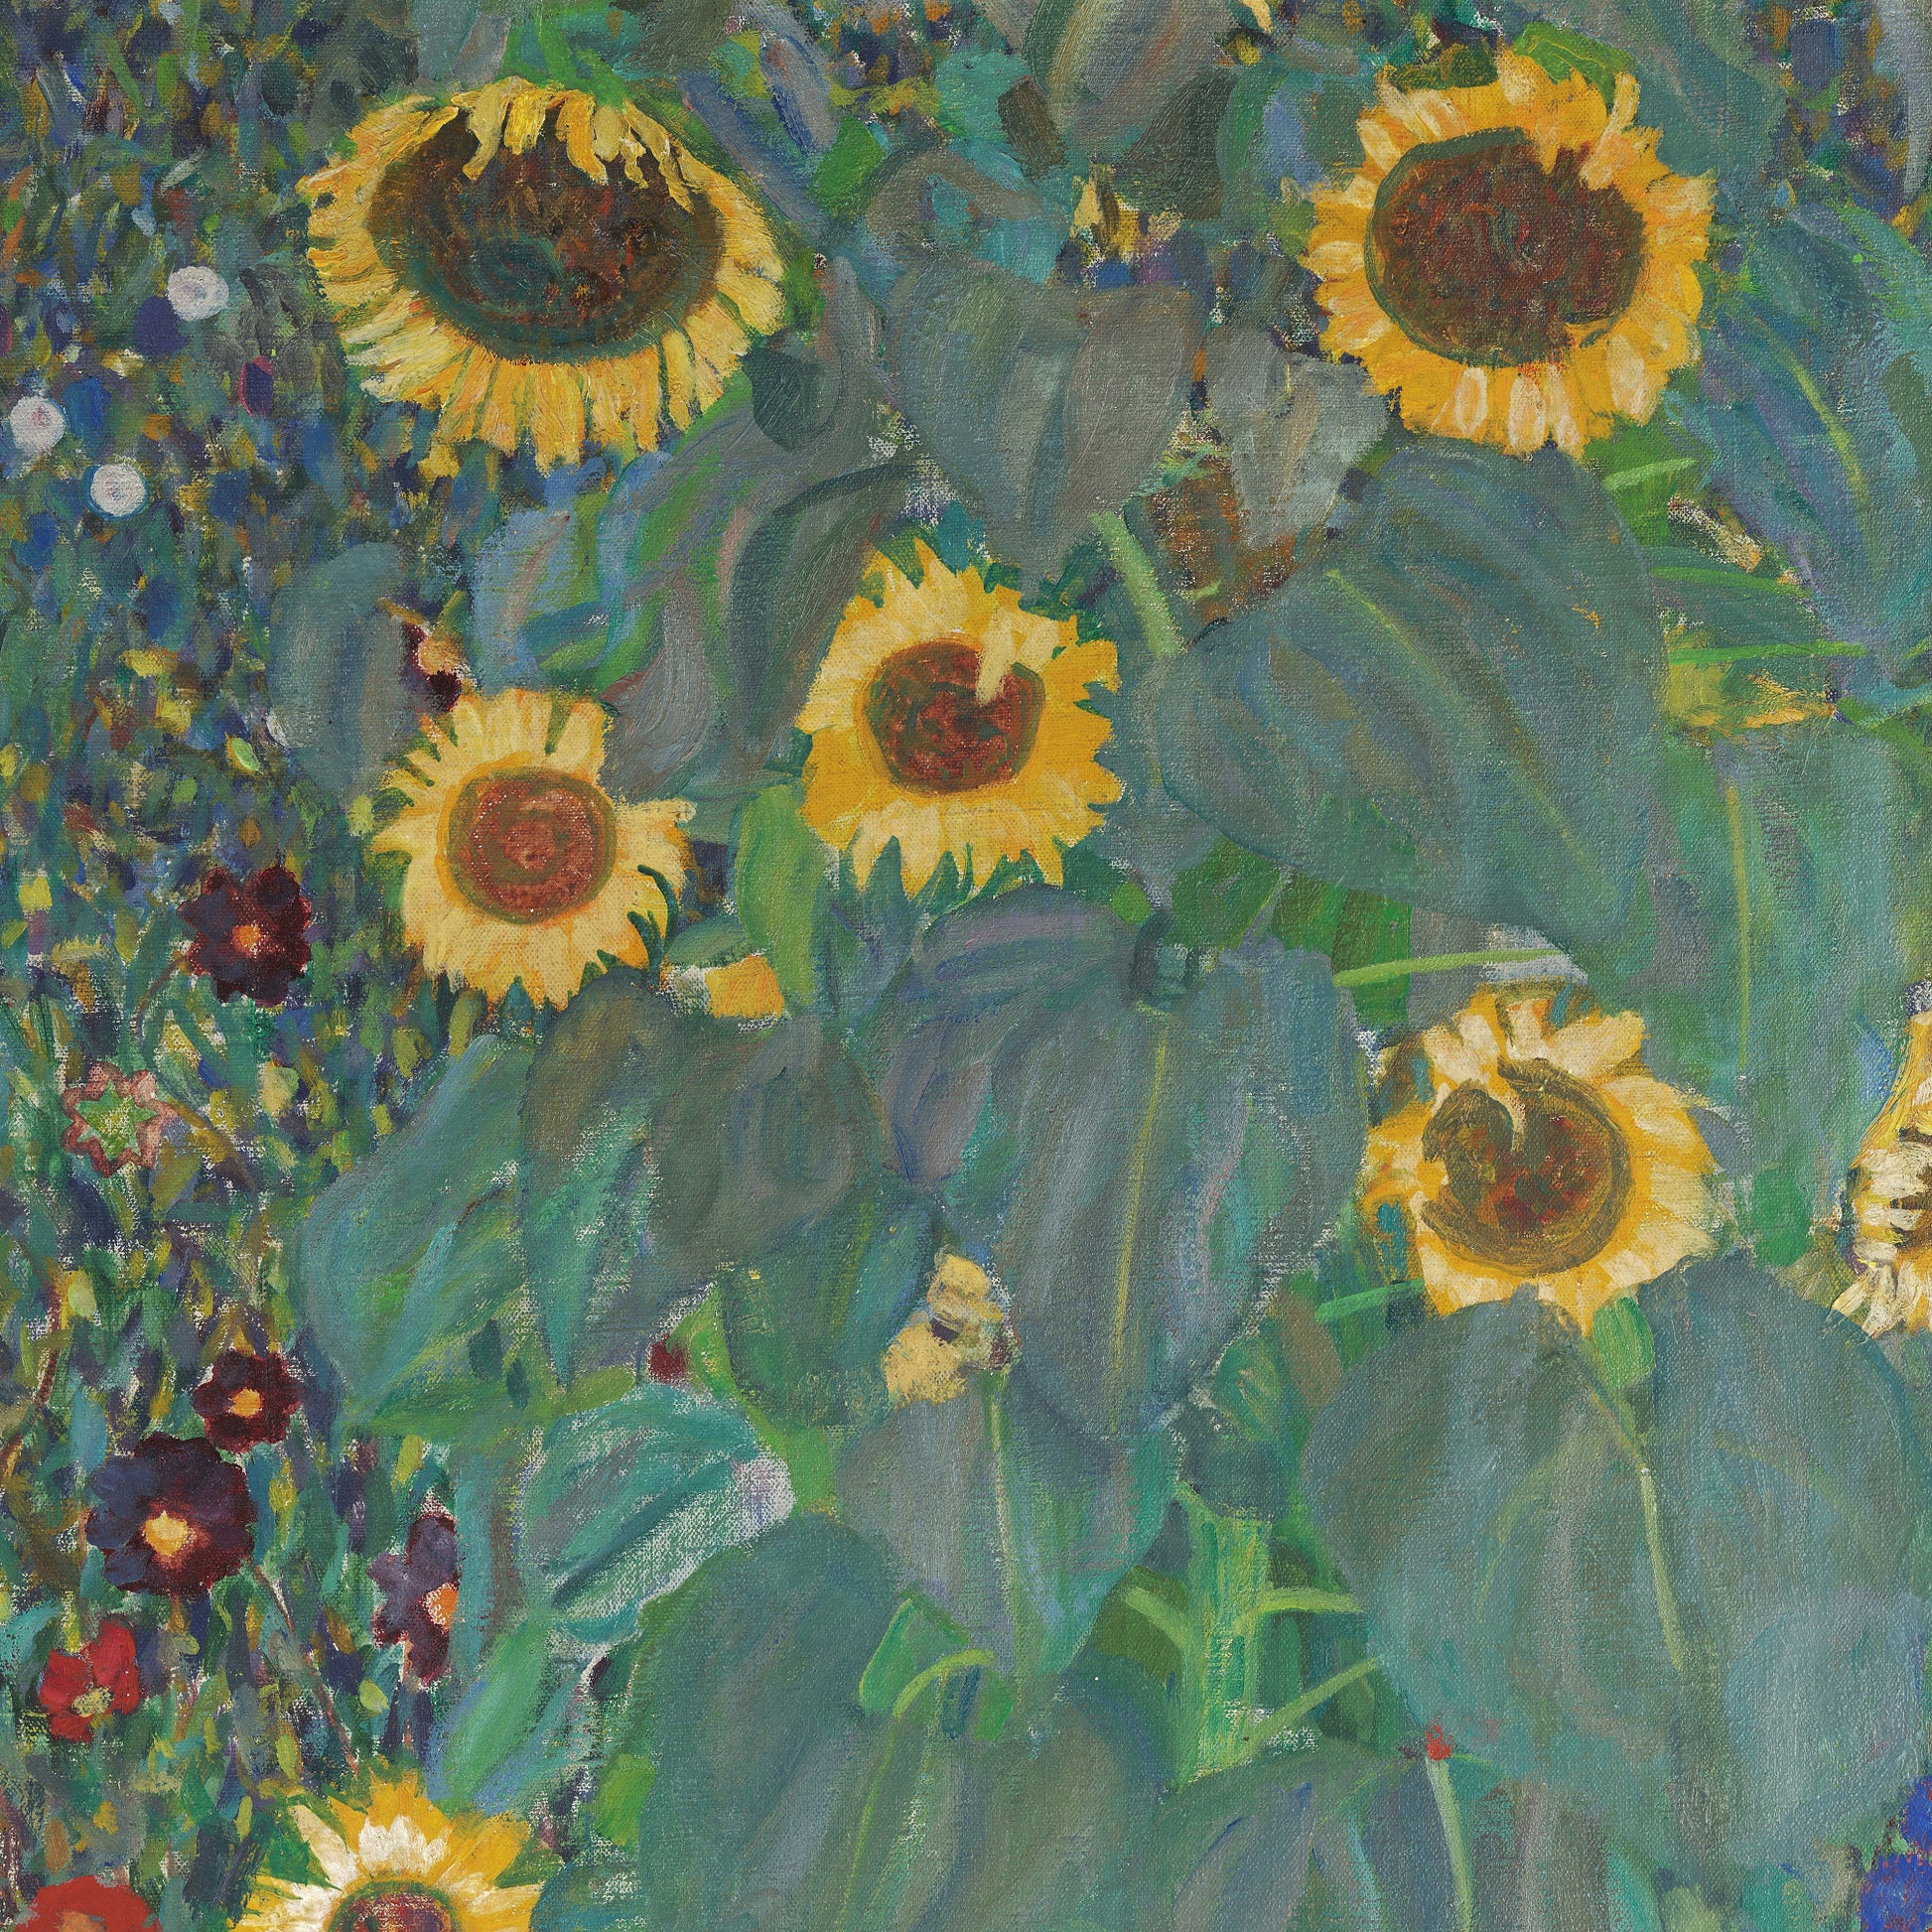 Farm Garden with Sunflowers by Gustav Klimt, 3d Printed with texture and brush strokes looks like original oil-painting, code:113